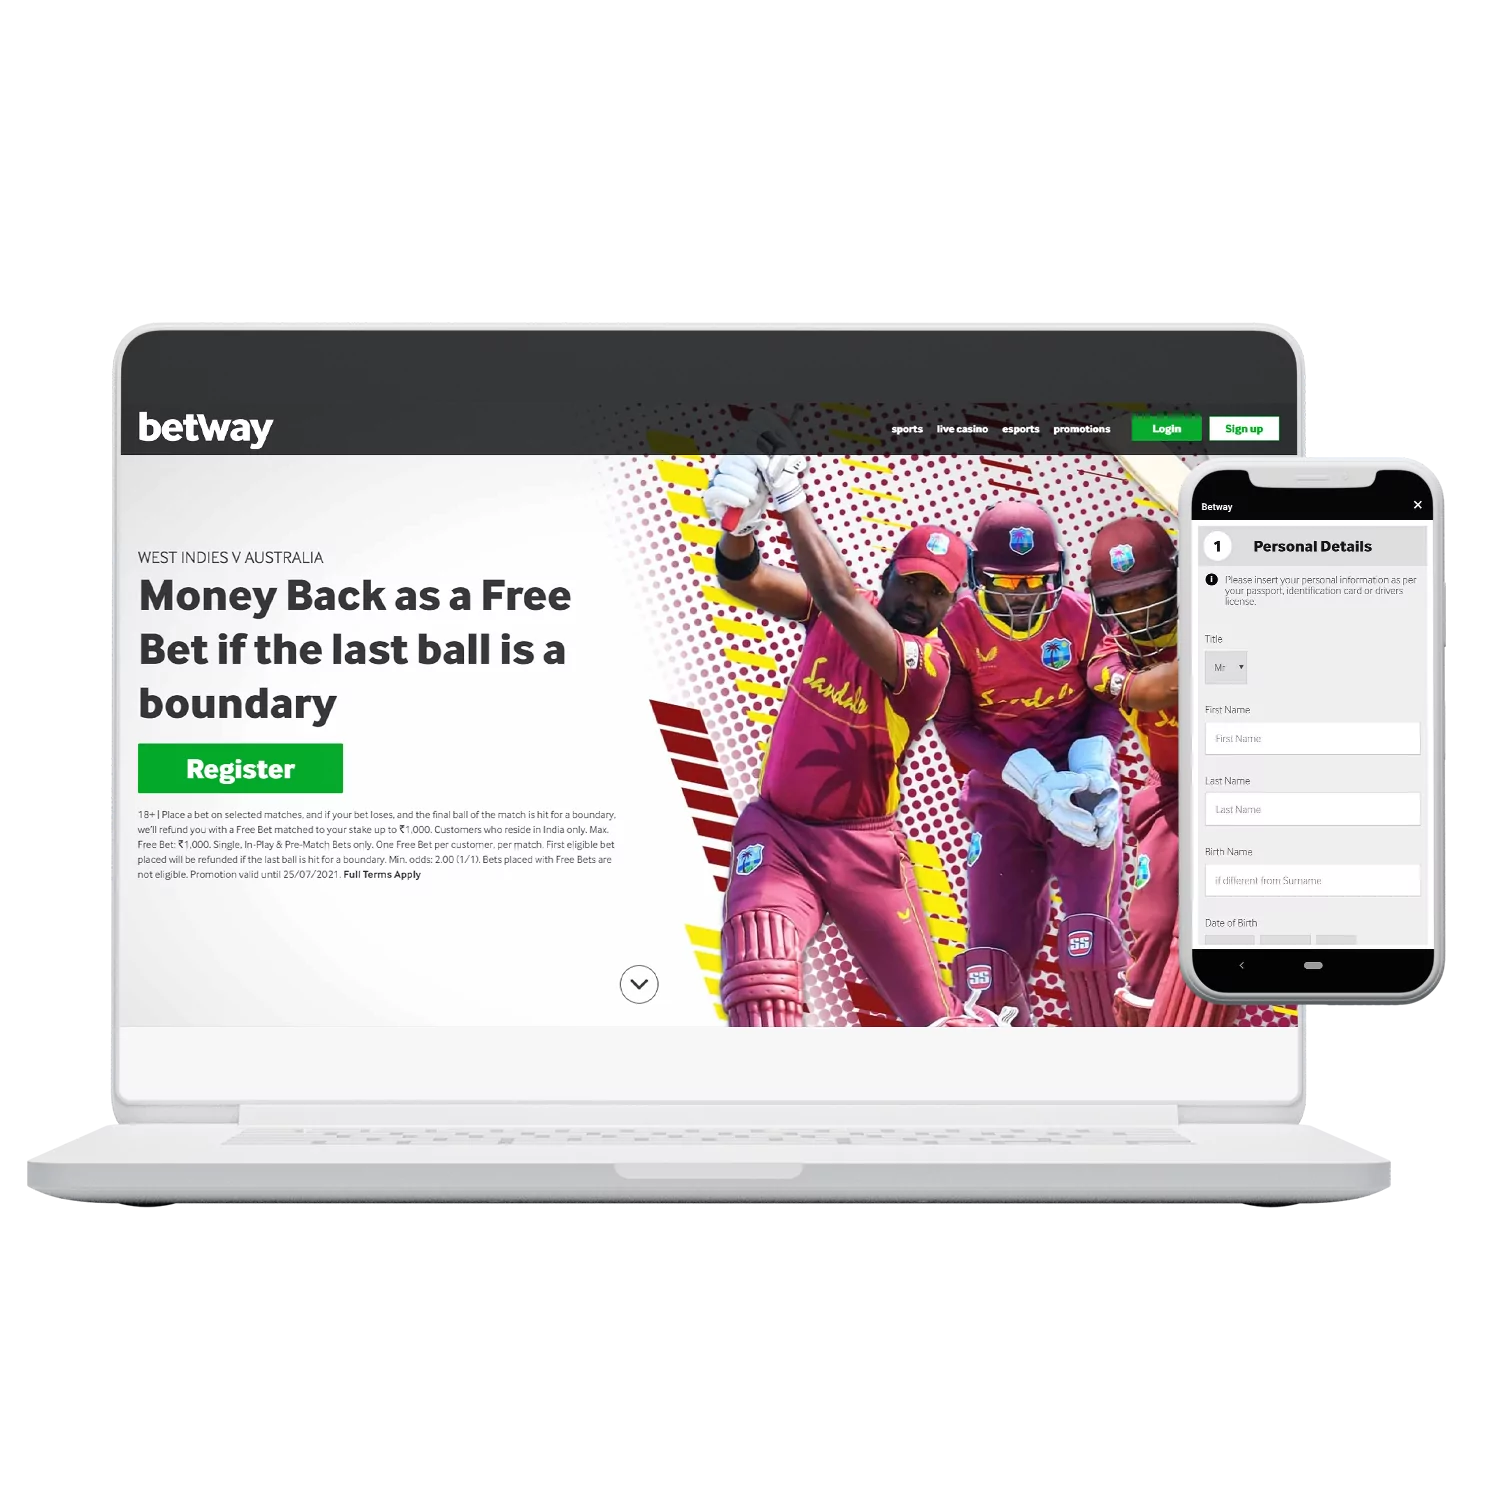 Learn how to sign up on Betway using the website or app.